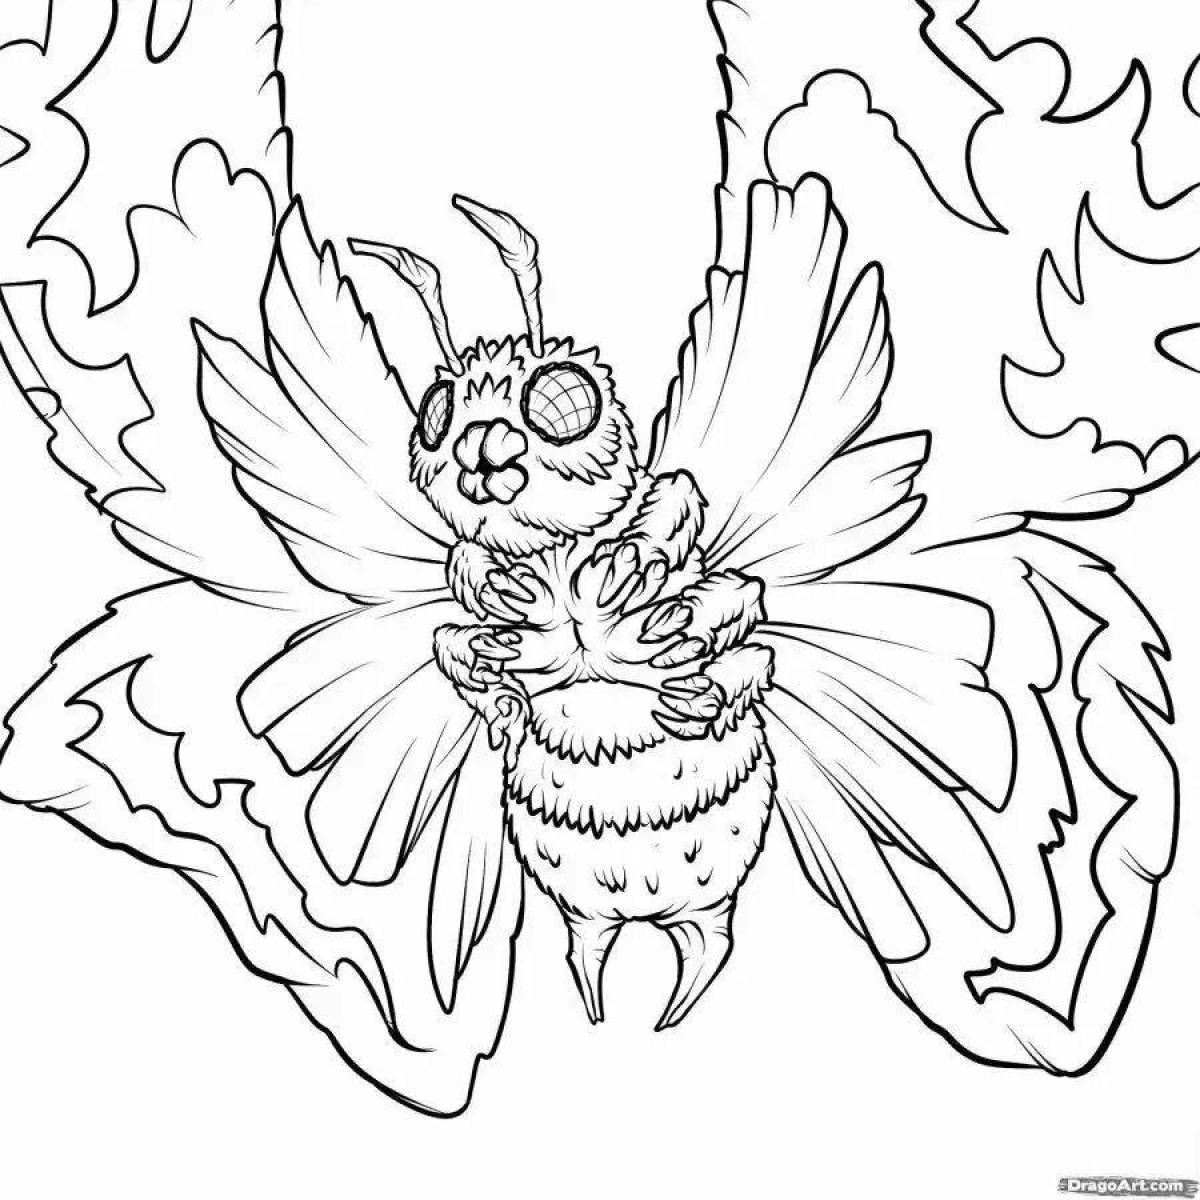 Exciting mothra butterfly coloring book